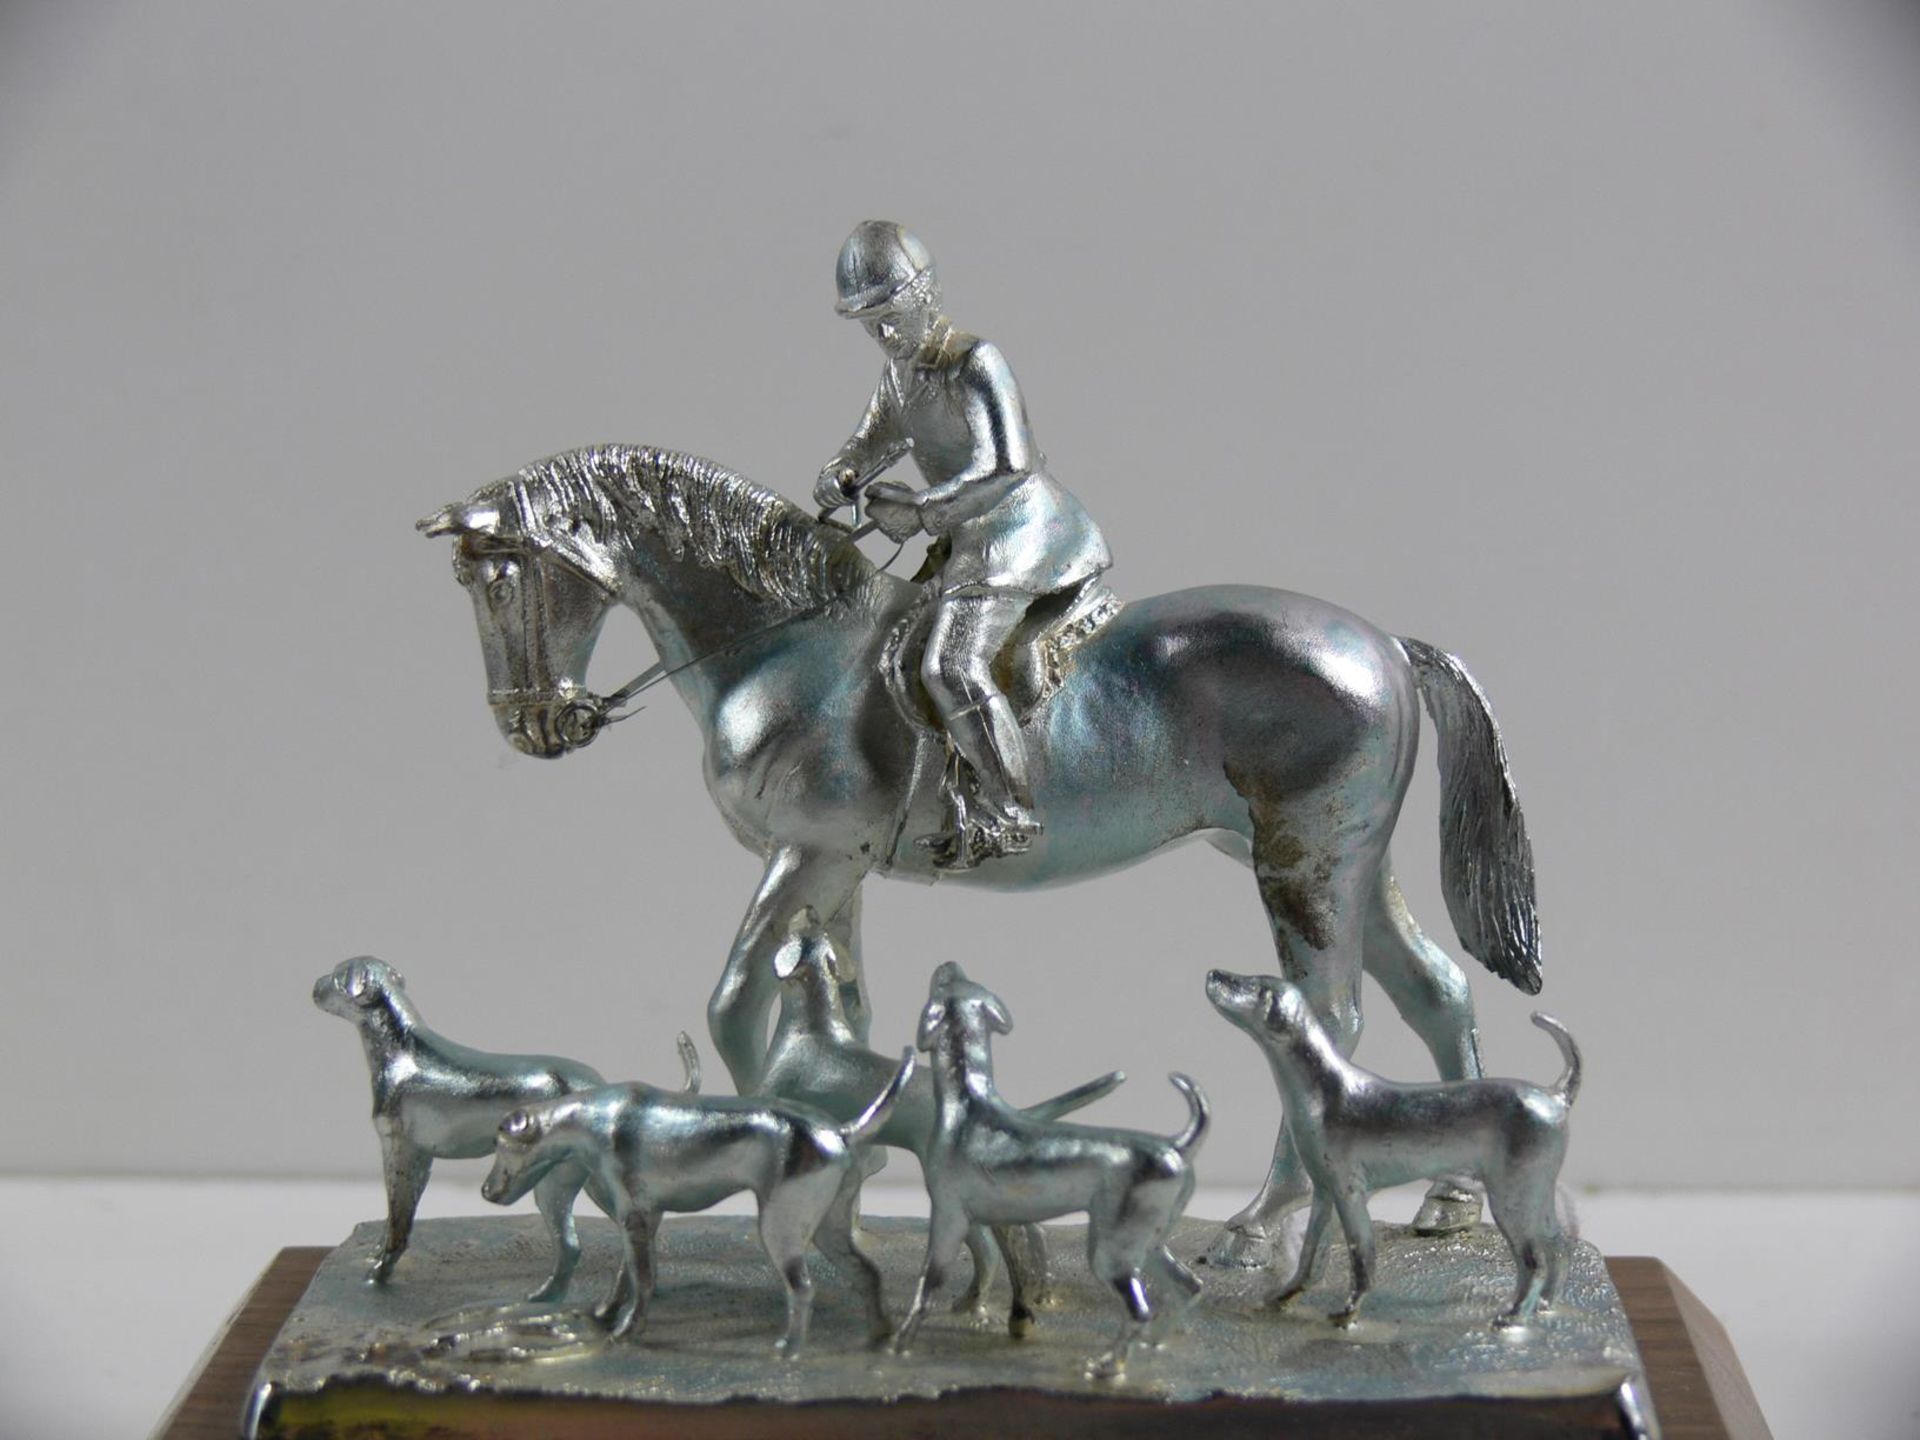 A Silver Model 'Master & Hounds' on Wooden Base (Birmingham - 1979 (?) Ammonite Ltd) (RRP £695.00) - Image 2 of 6